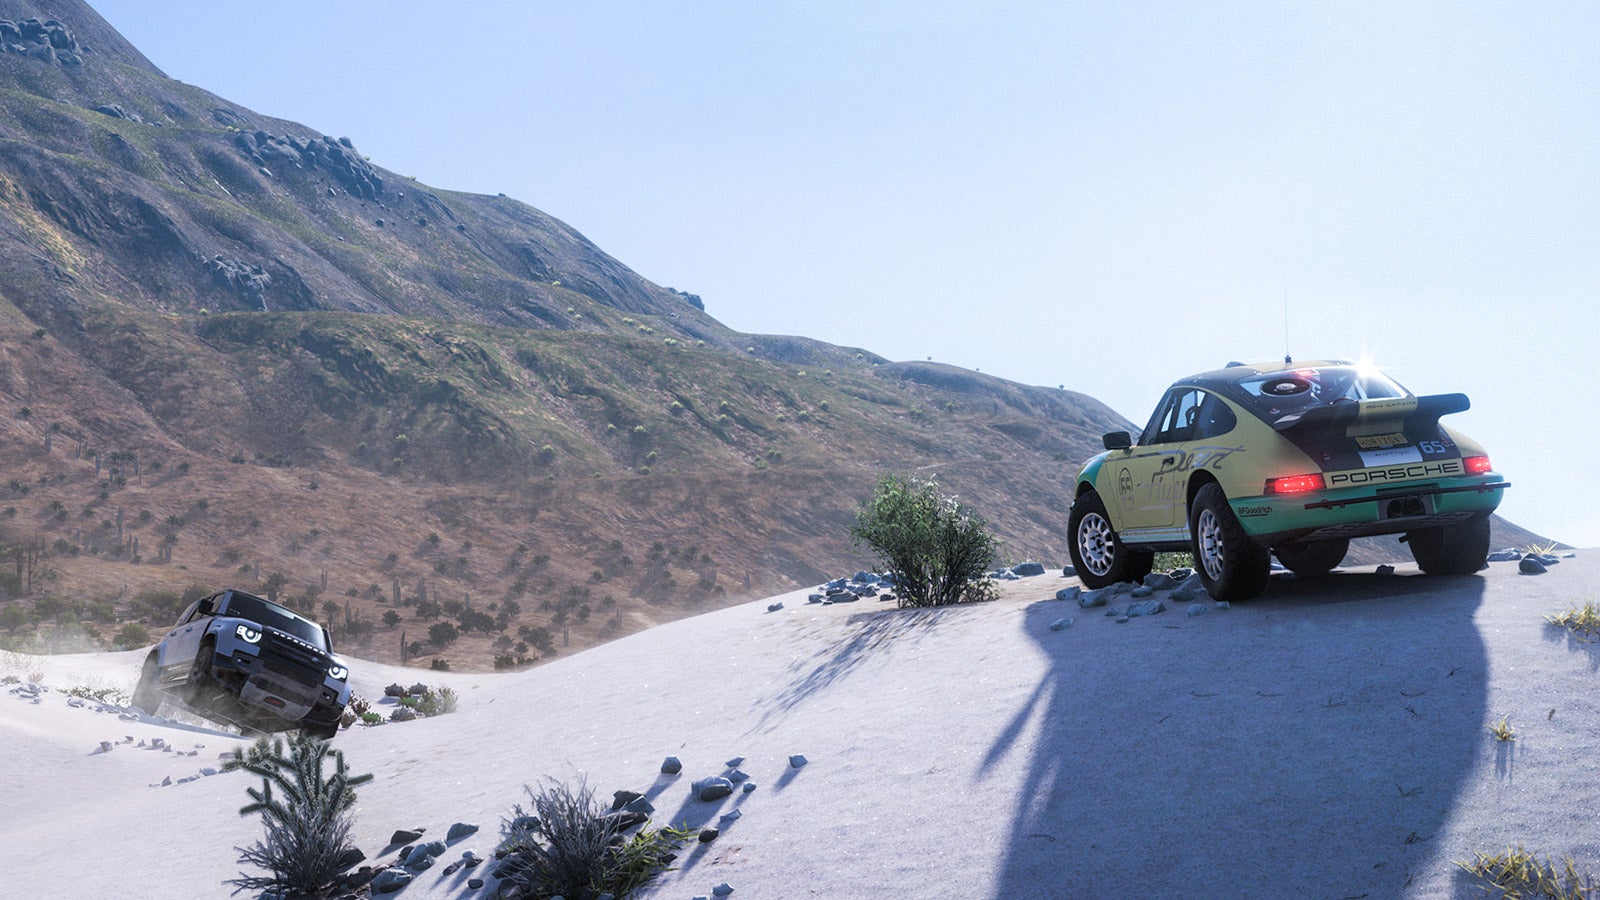 Forza Horizon 5 Is About The Journey, Destination Be Damned